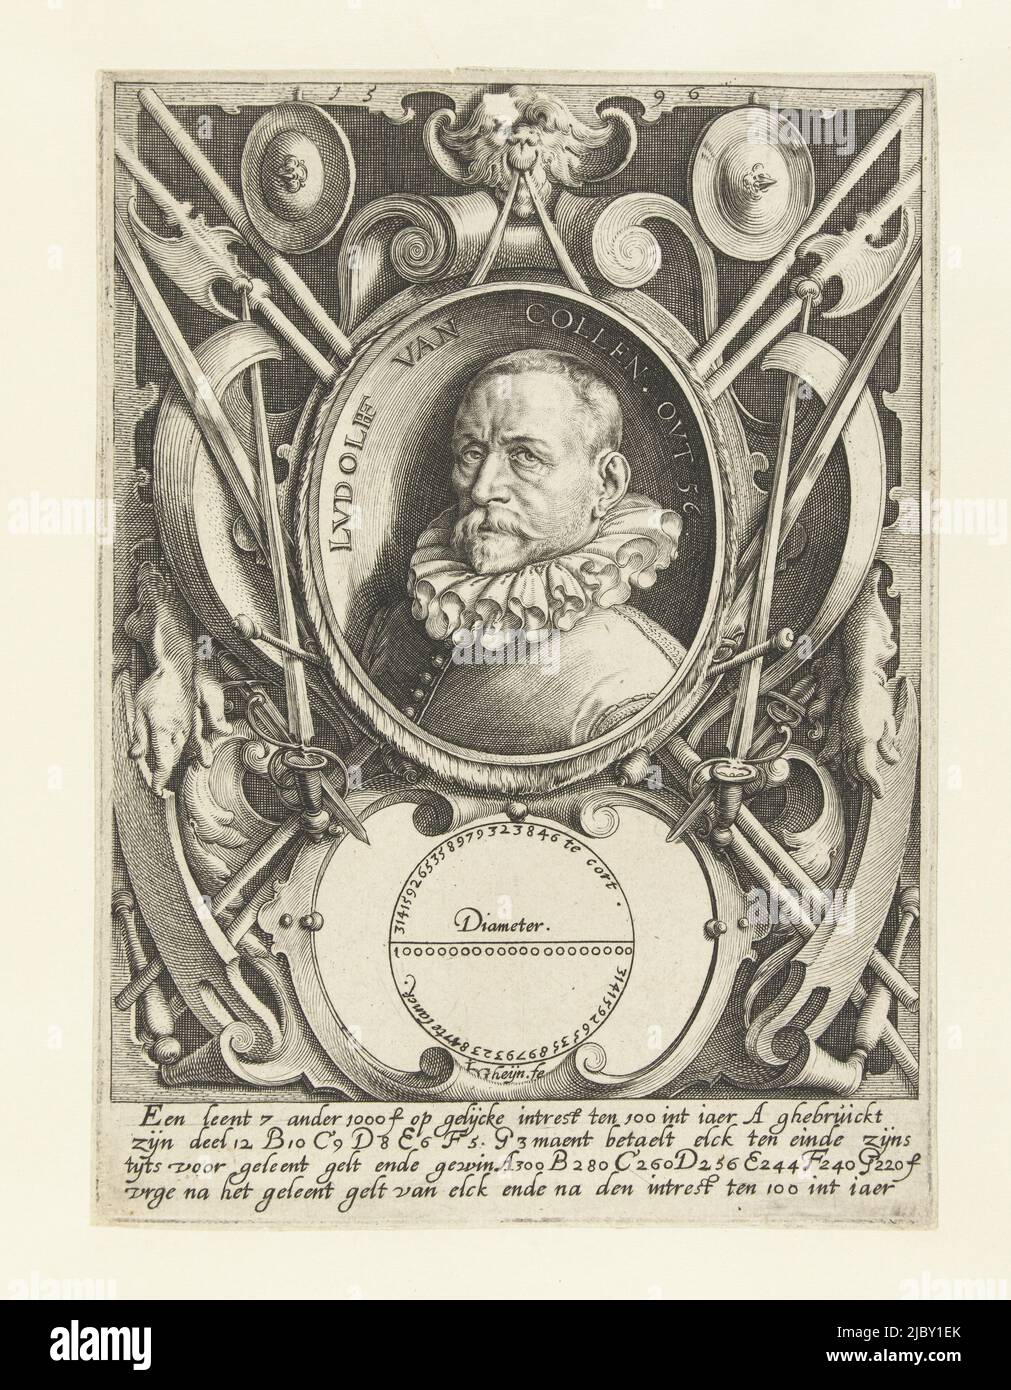 Bust of Ludolf van Ceulen (Hildesheim, 28 January 1540 - Leiden, 31 December 1610) at the age of 56, with collar folded loose, in oval with edge lettering, framed in ornamental frame with scrolls and weapons. Below the portrait an image of a circle with a description of the number pi. Under the representation a four-line Dutch caption. Van Ceulen was a fencer and mathematician. He was (according to Meursius in 1599, according to the resolutions of the Curators on January 10, 1600) on the recommendation of Prince Maurice together with Simon Fransz. van Merwen appointed professor in the ' Stock Photo